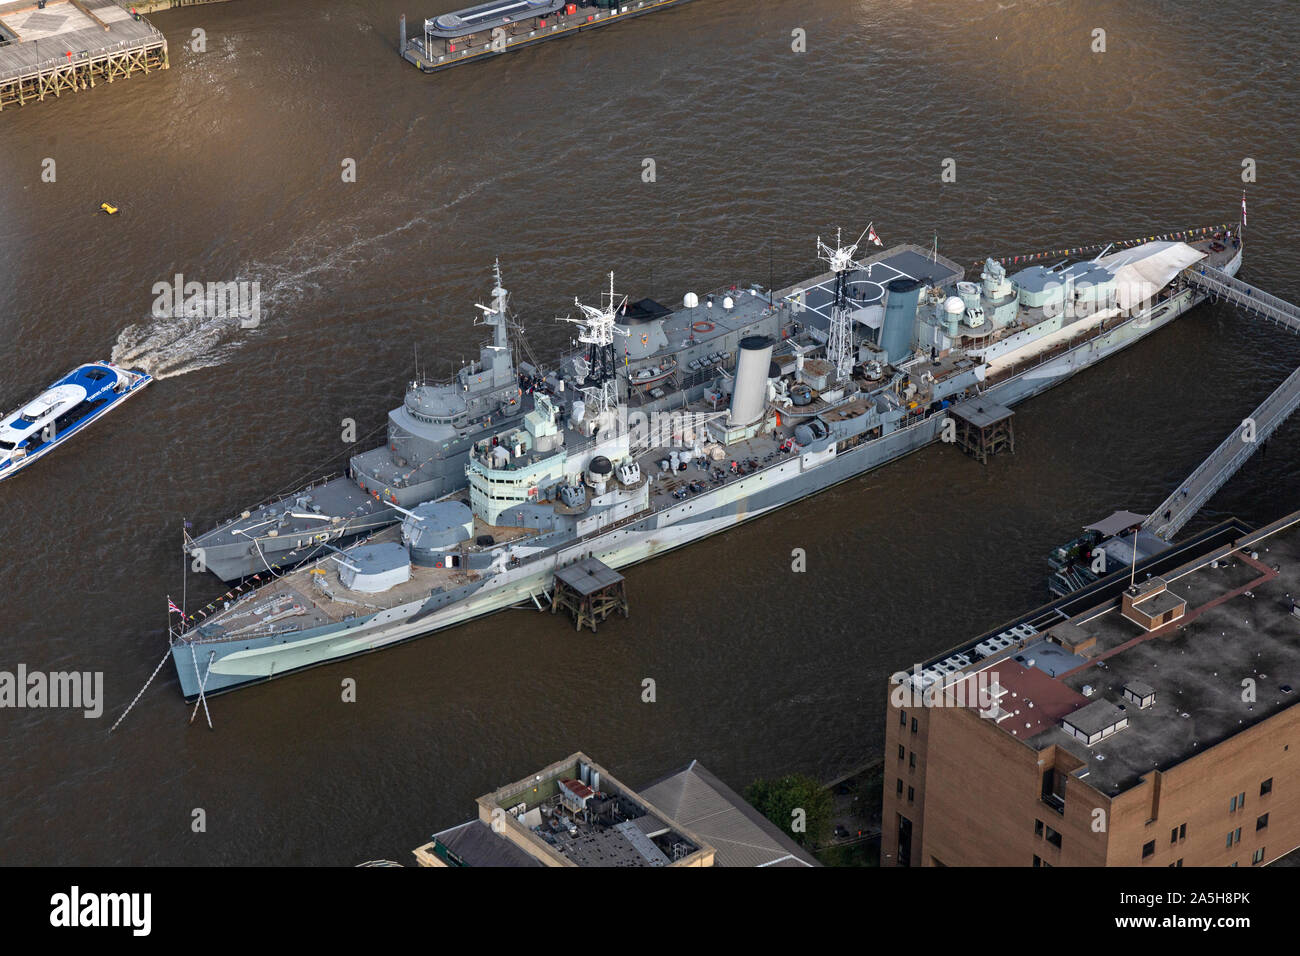 An aerial view looking down on the River Thames in London, with HMS Belfast and a Brazilian Navy training Ship U27 moored alongside. Stock Photo